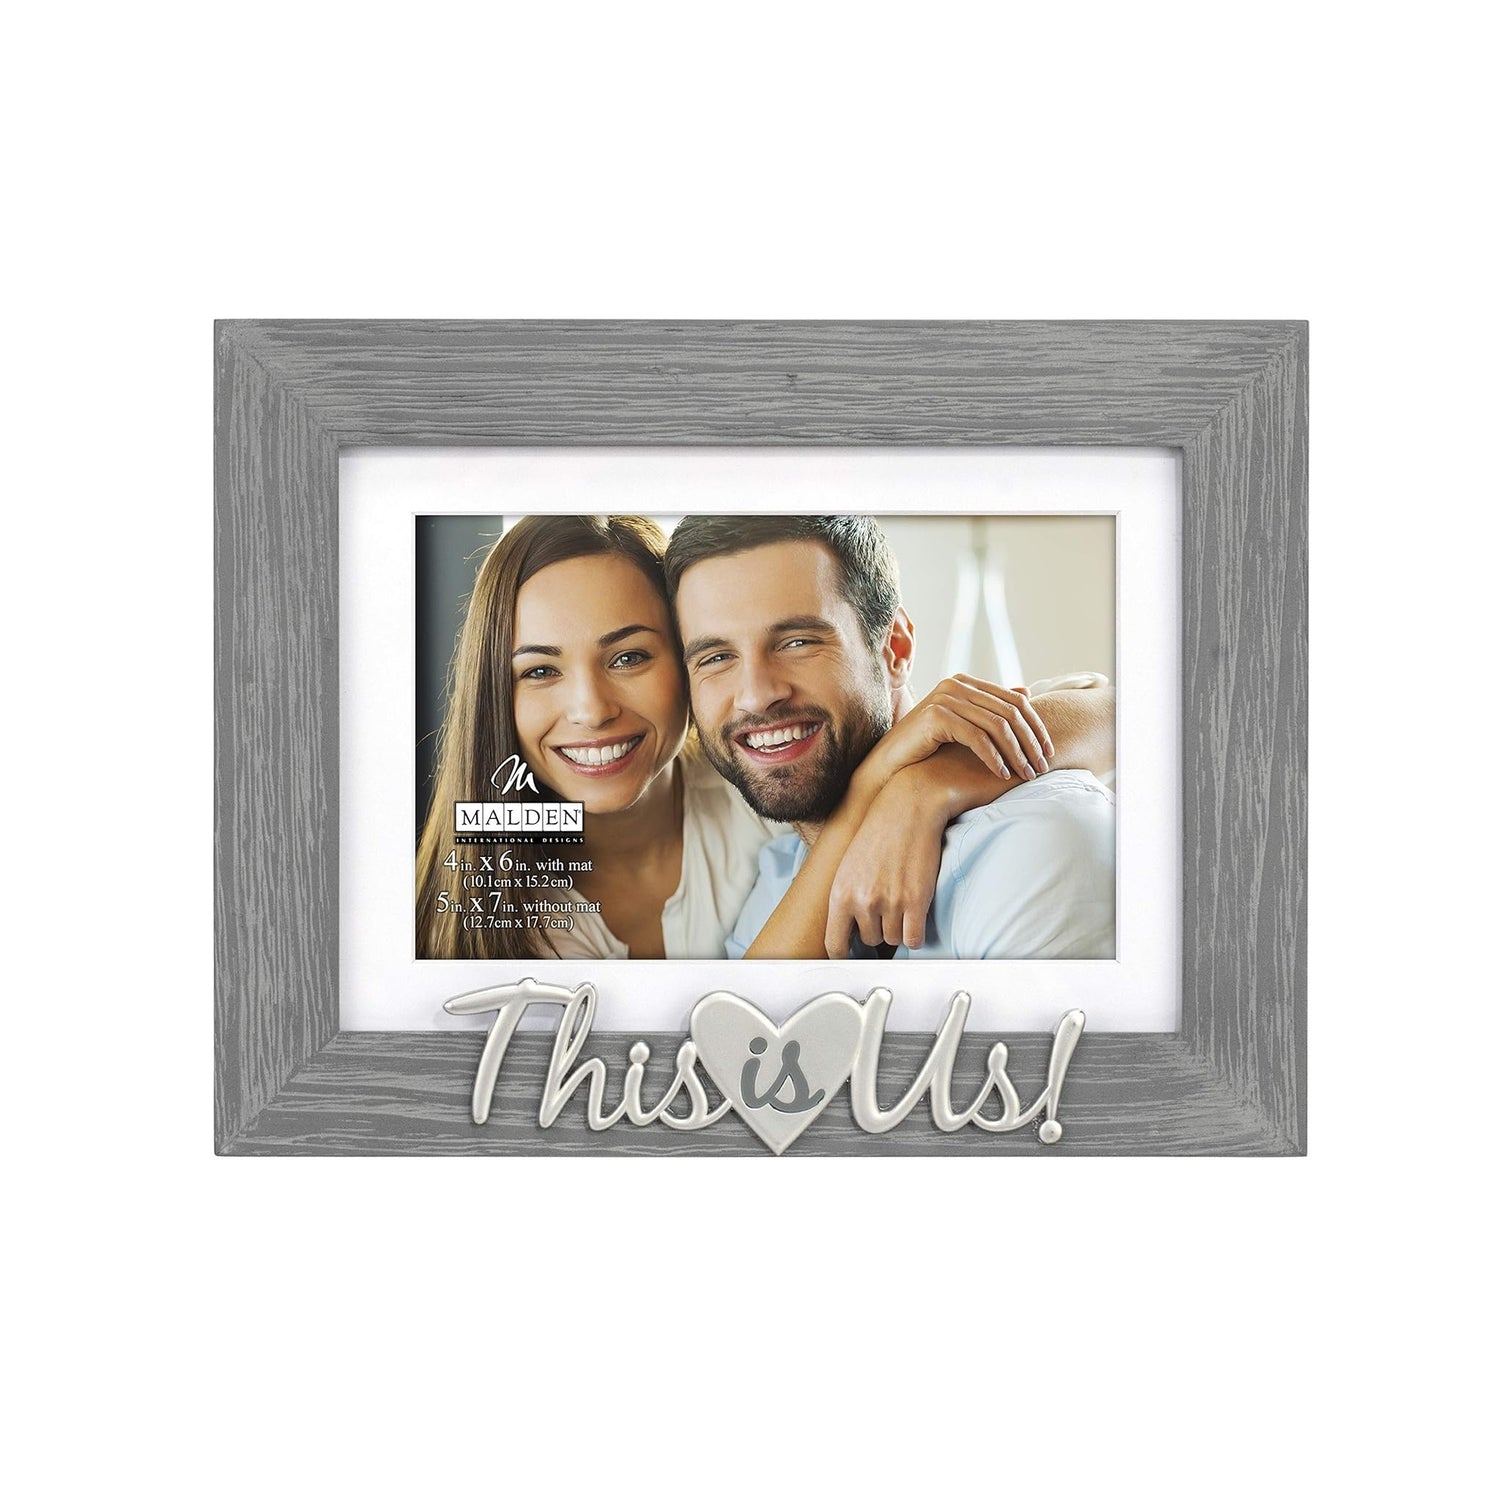 Malden "This is us" Sunwashed Wood Photo Frame